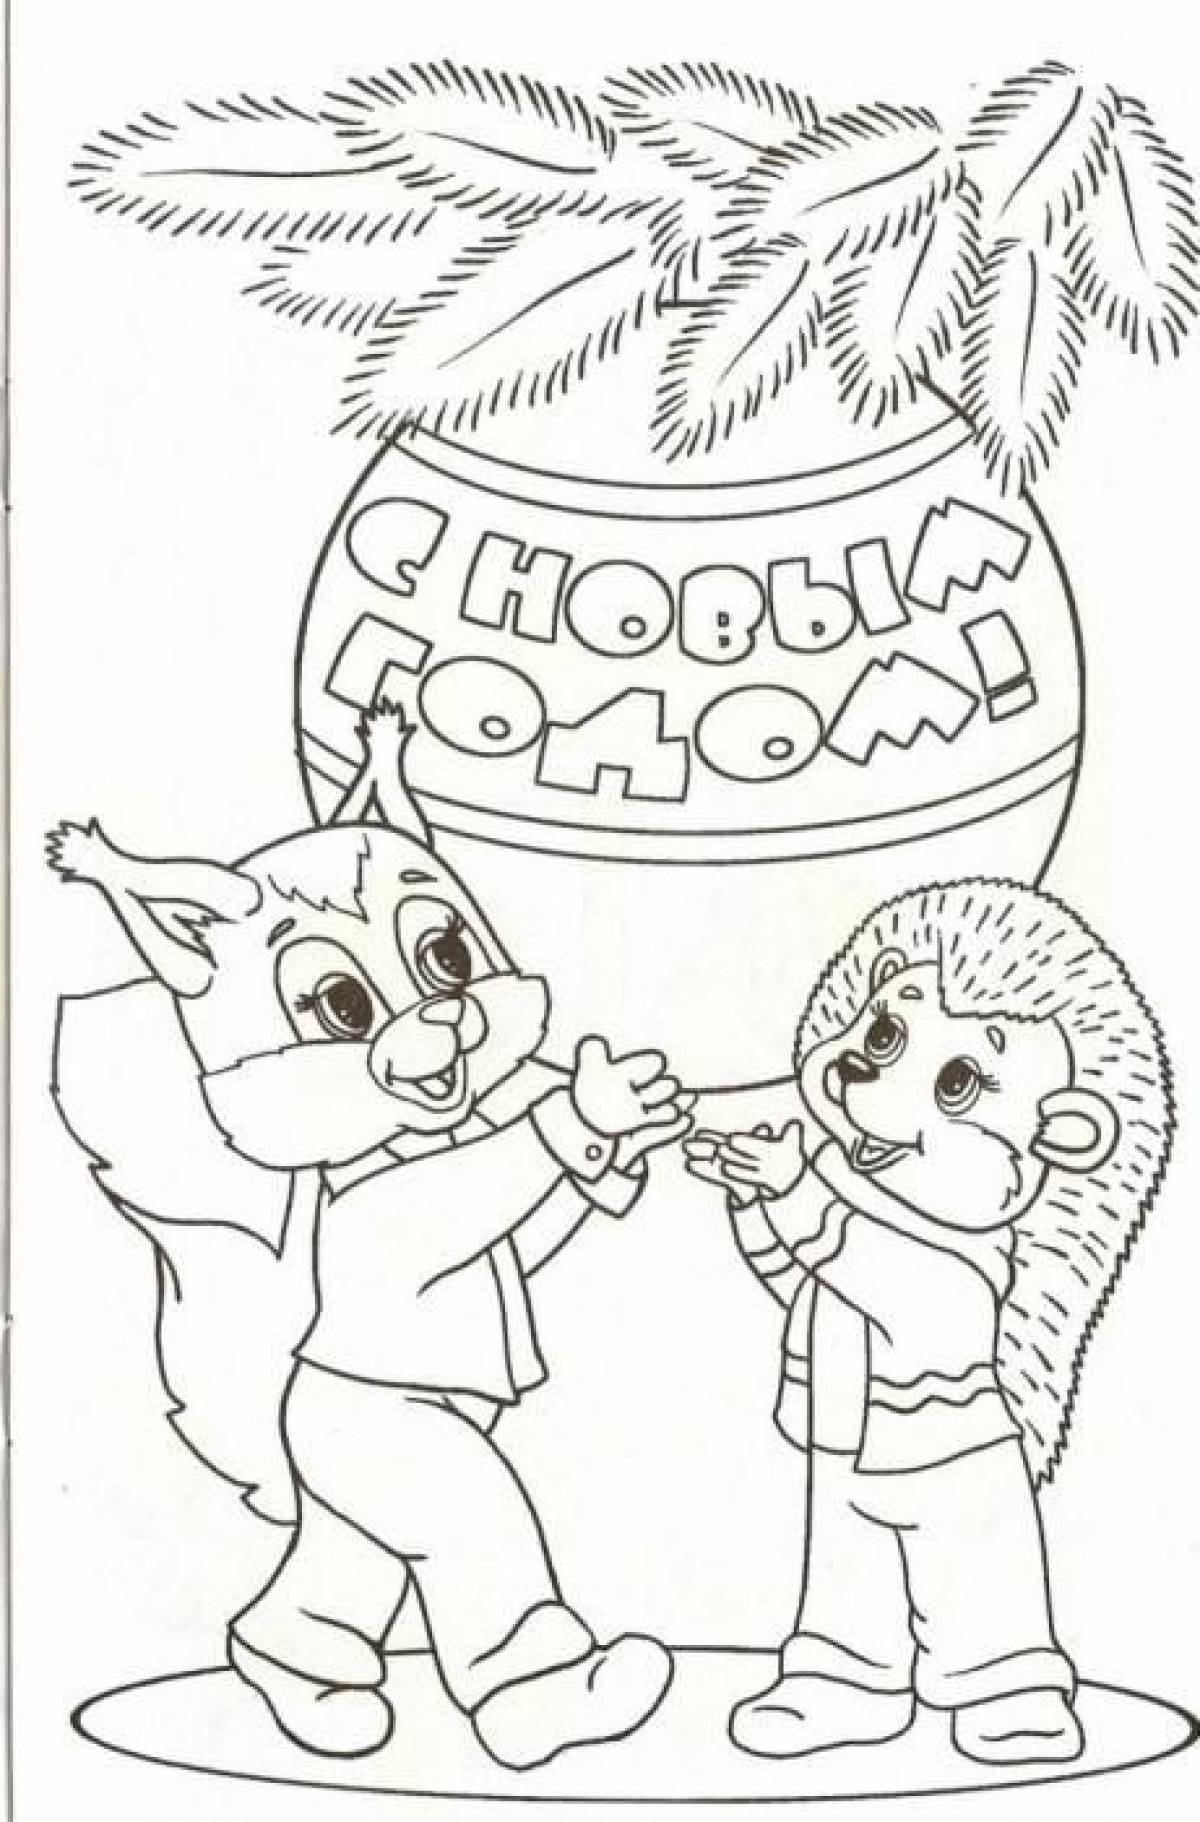 Jolly old new year coloring book